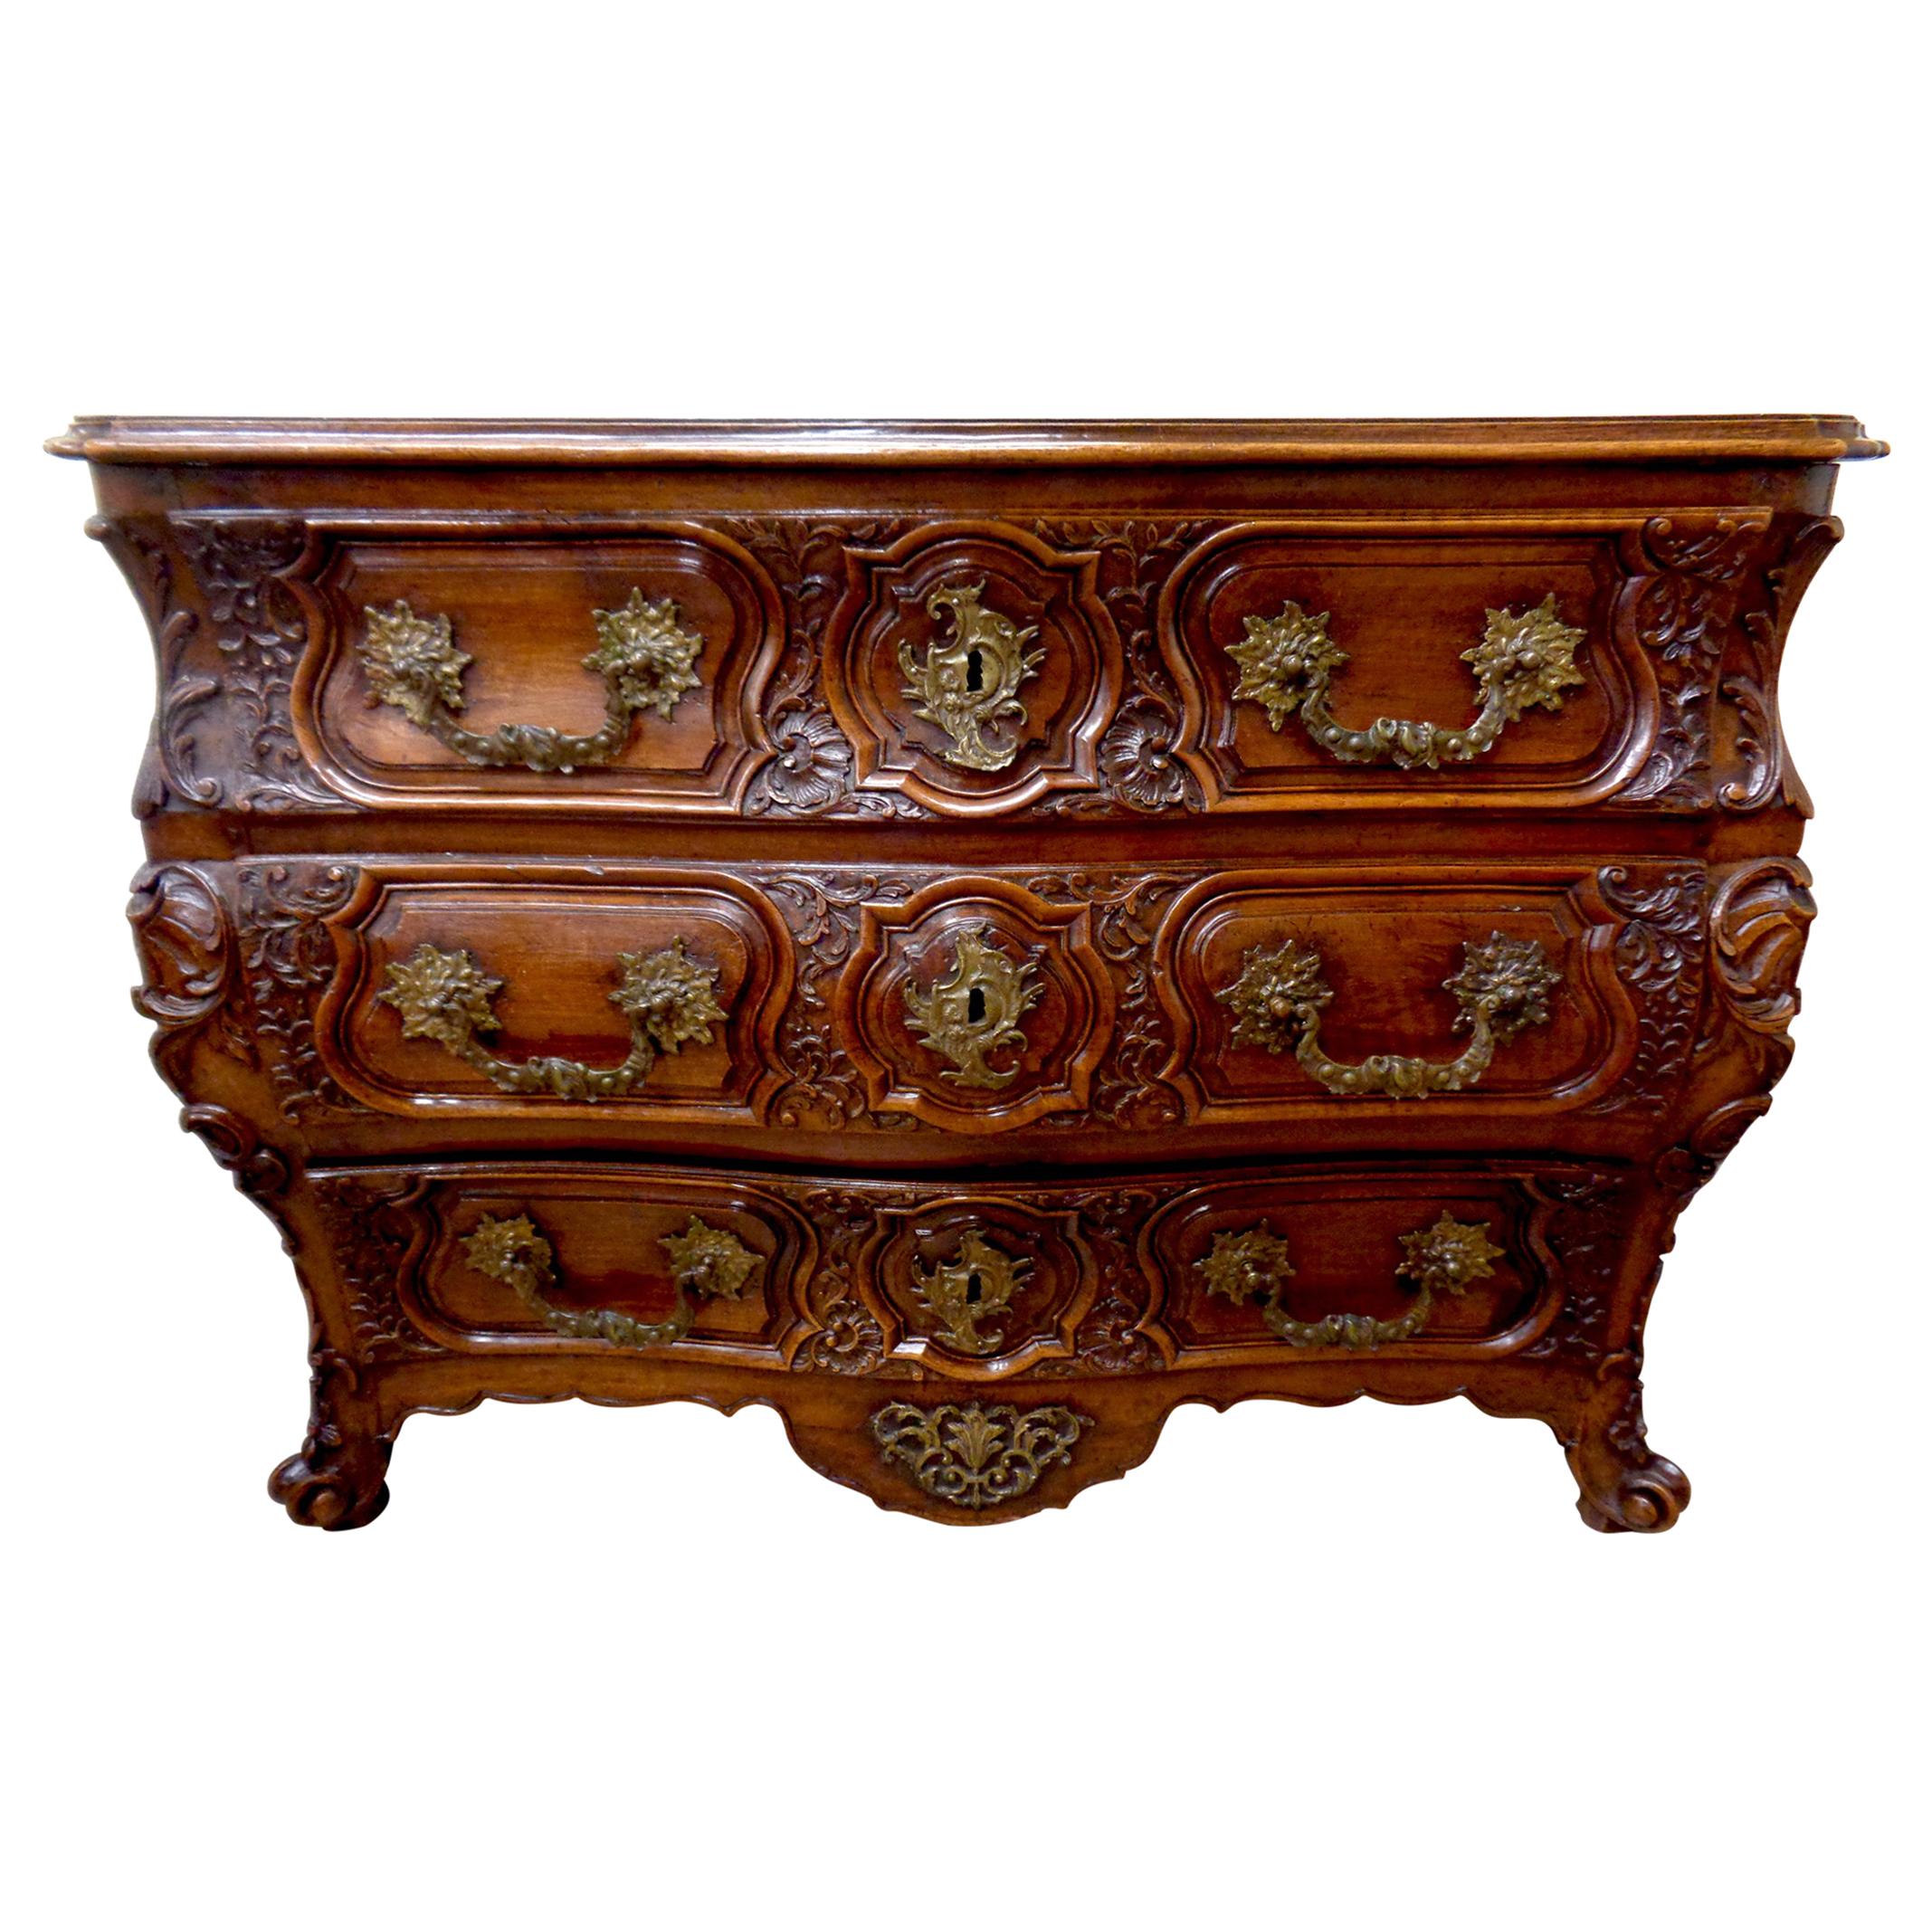 Period Louis XV Chateau French Walnut Lyonnaise Commode For Sale